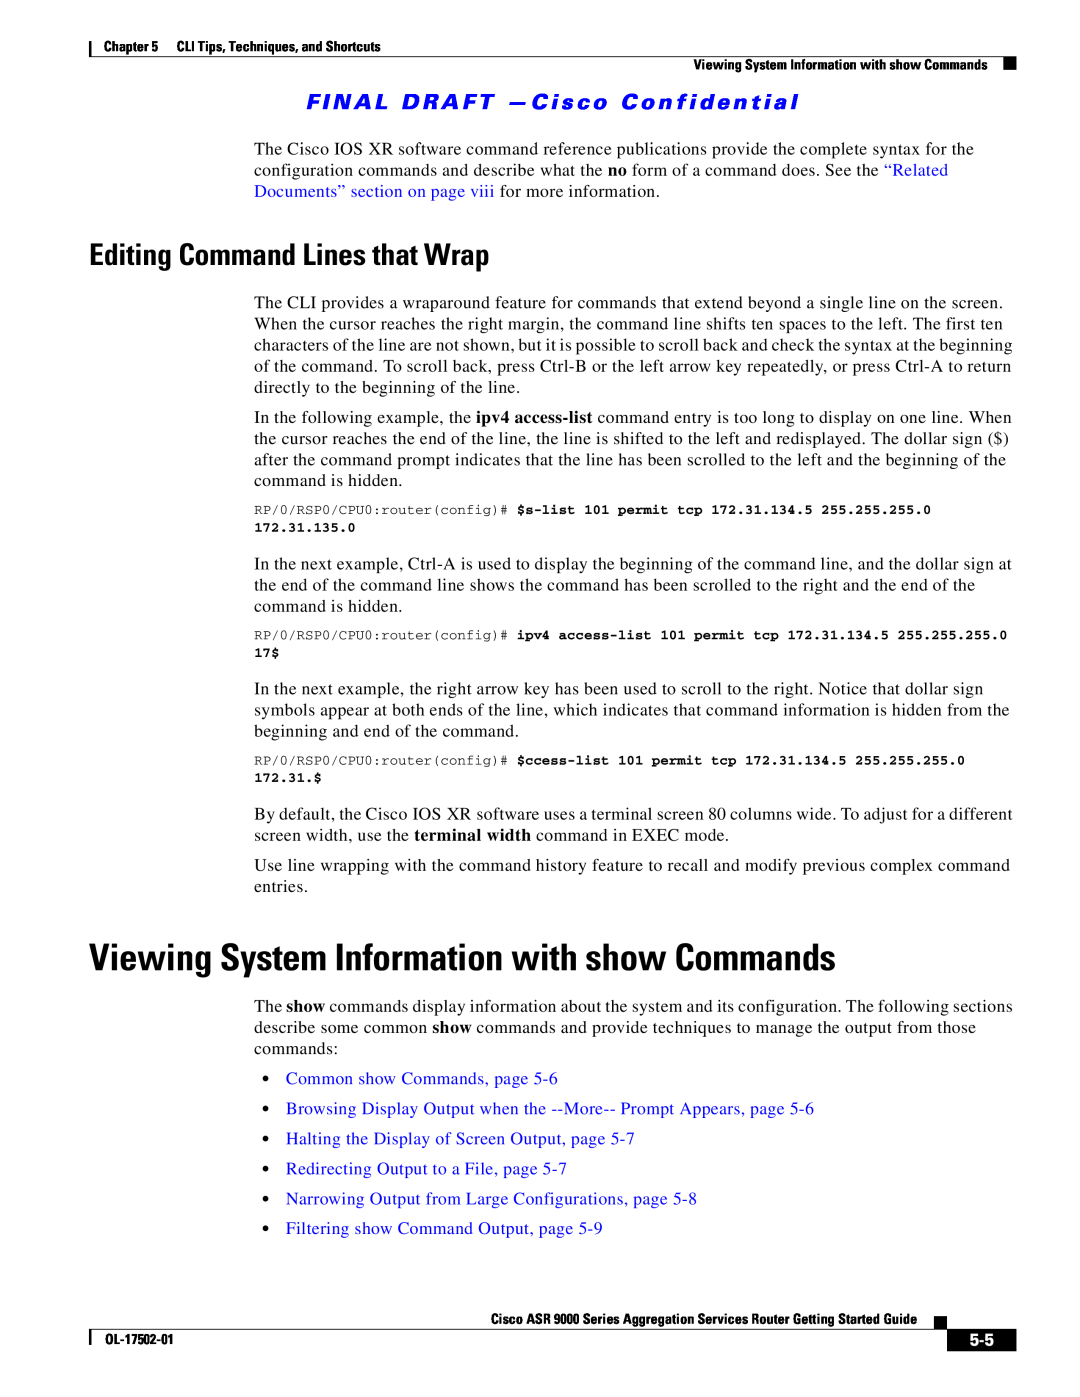 Cisco Systems A9KMOD80TR, ASR 9000 manual Viewing System Information with show Commands, Editing Command Lines that Wrap 